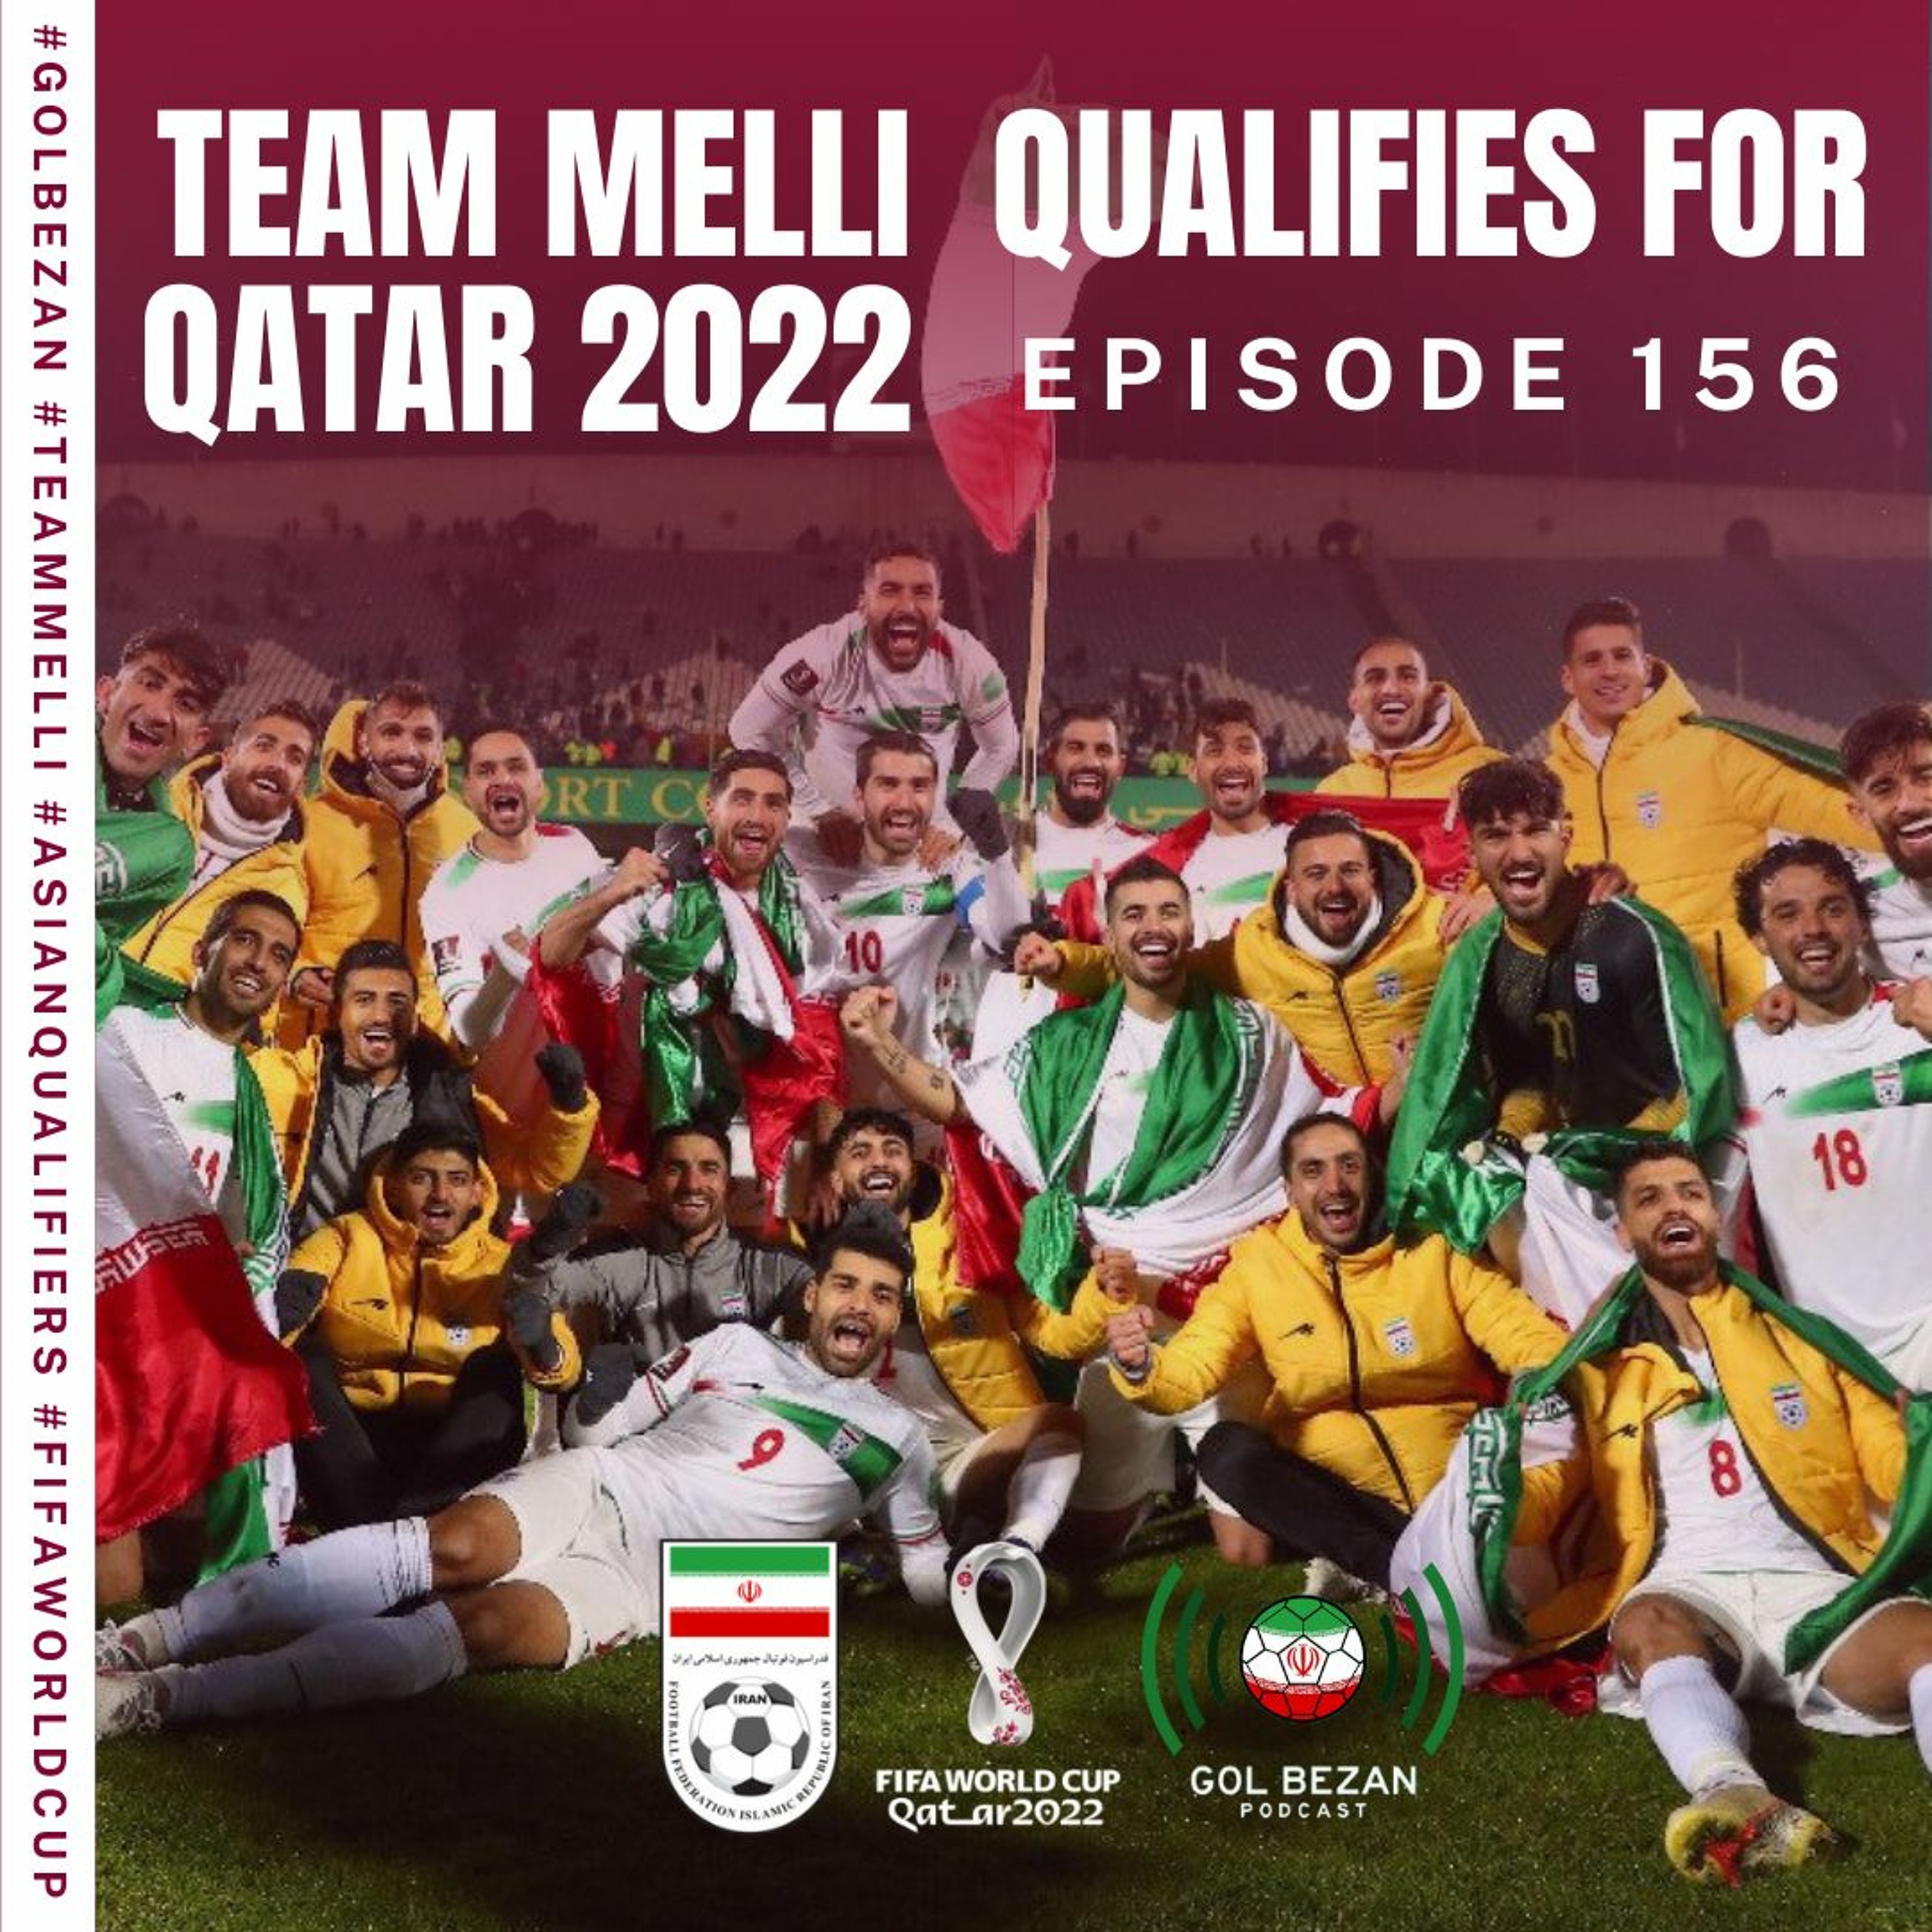 QATAR 2022 HERE WE COME! Iran qualifies for THIRD consecutive World Cup!